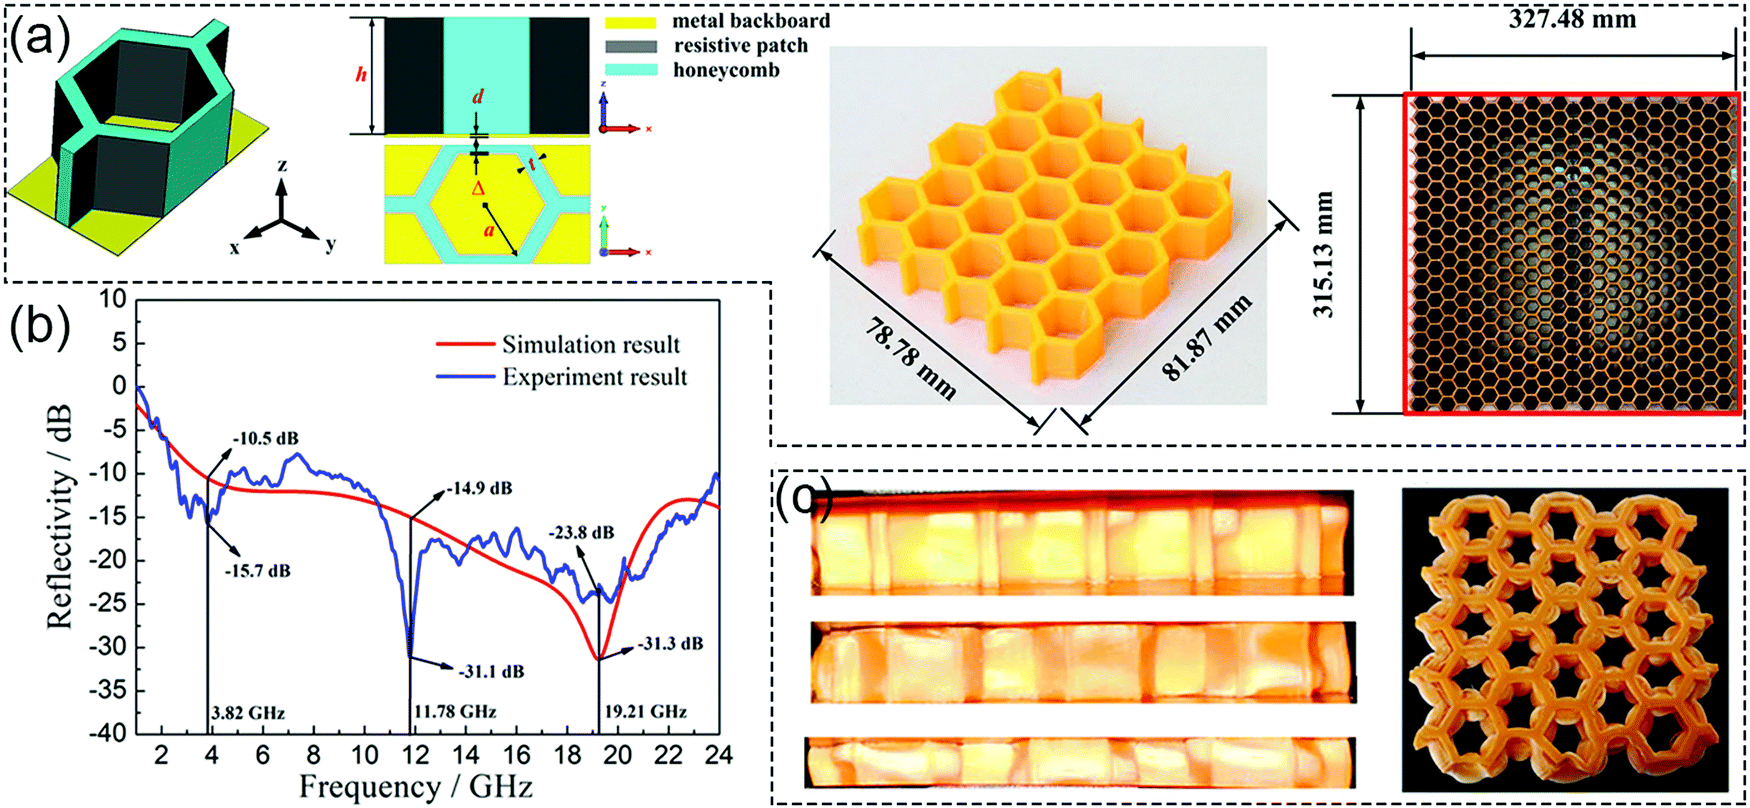 3D/4D printed tunable electrical metamaterials with more sophisticated  structures - Journal of Materials Chemistry C (RSC Publishing)  DOI:10.1039/D1TC02588K